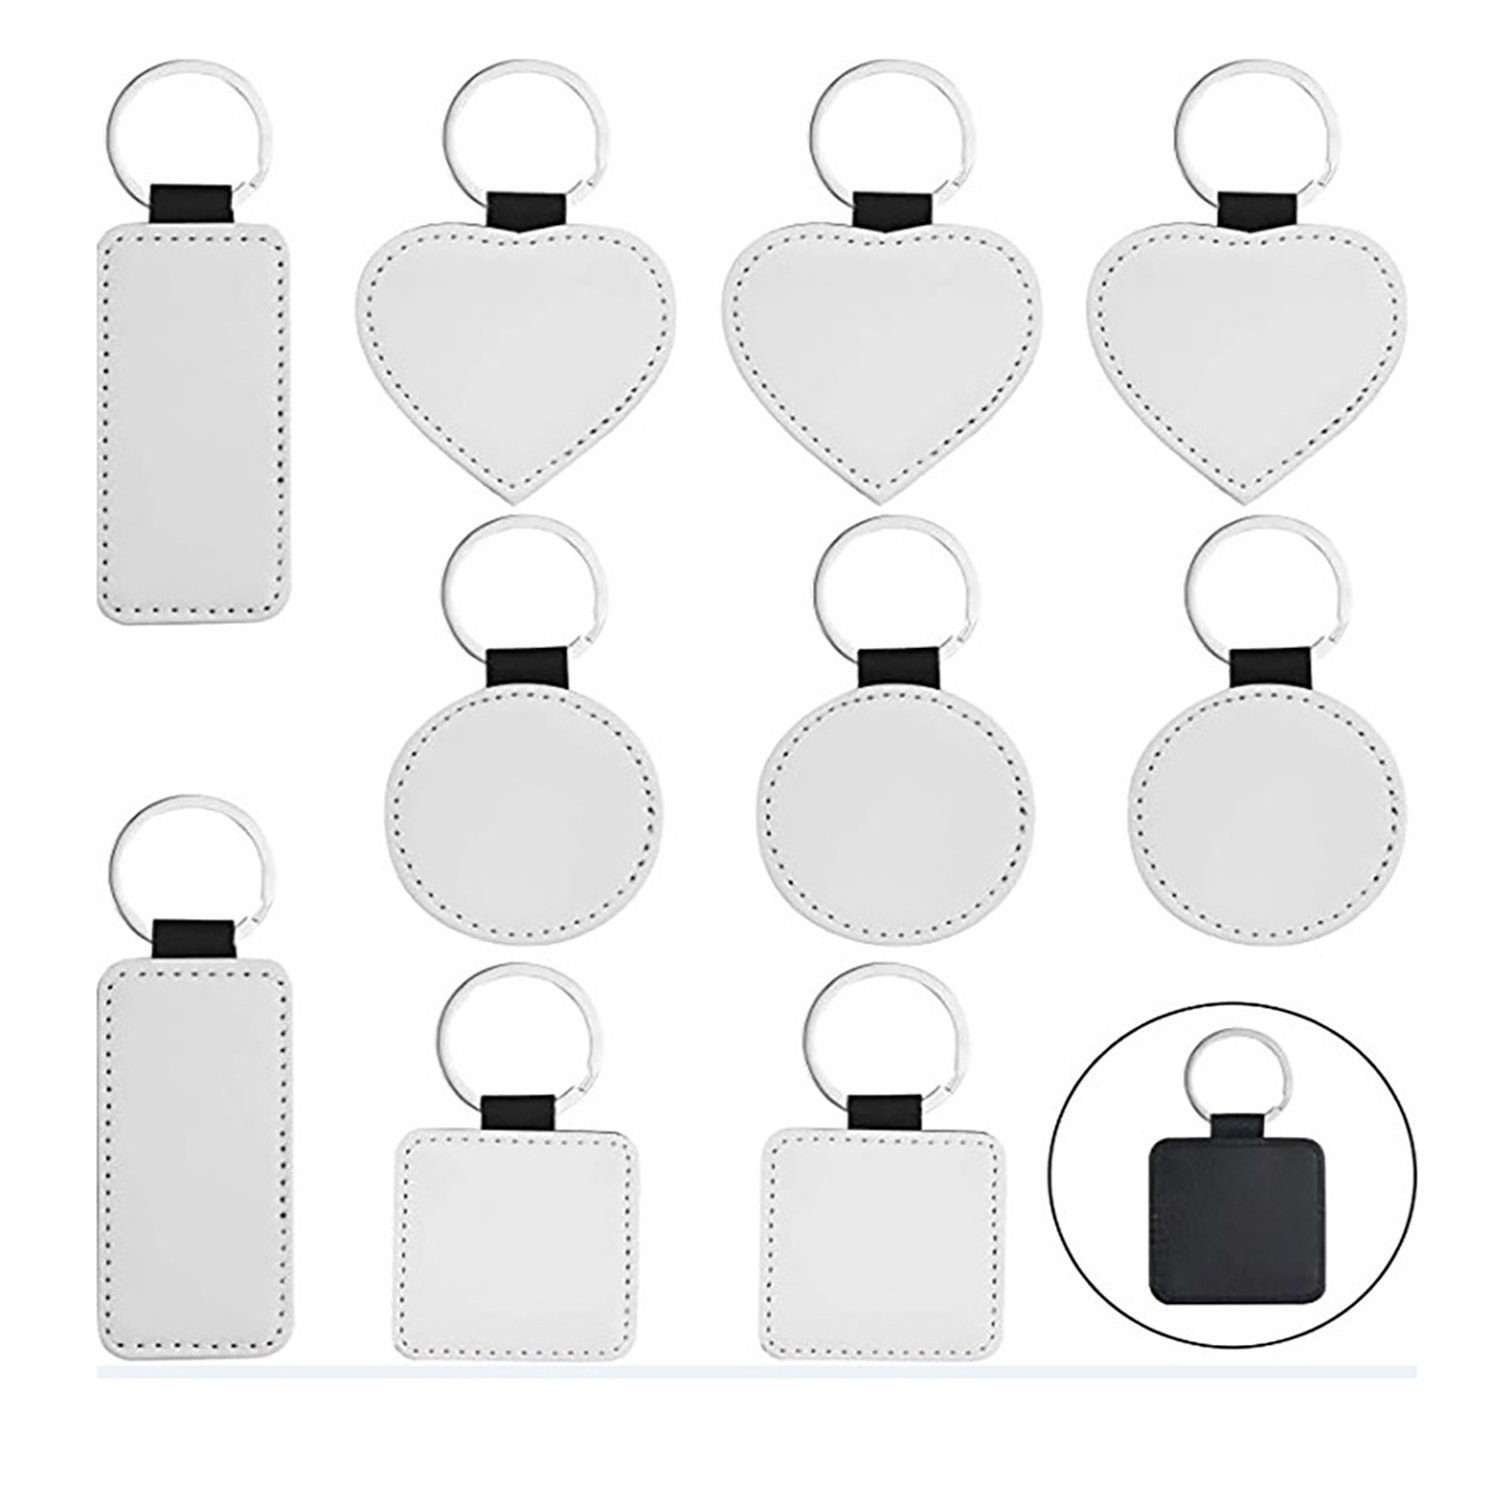 MIXED Shapes Clear Acrylic Keychain Blanks SET of 10, Keychains